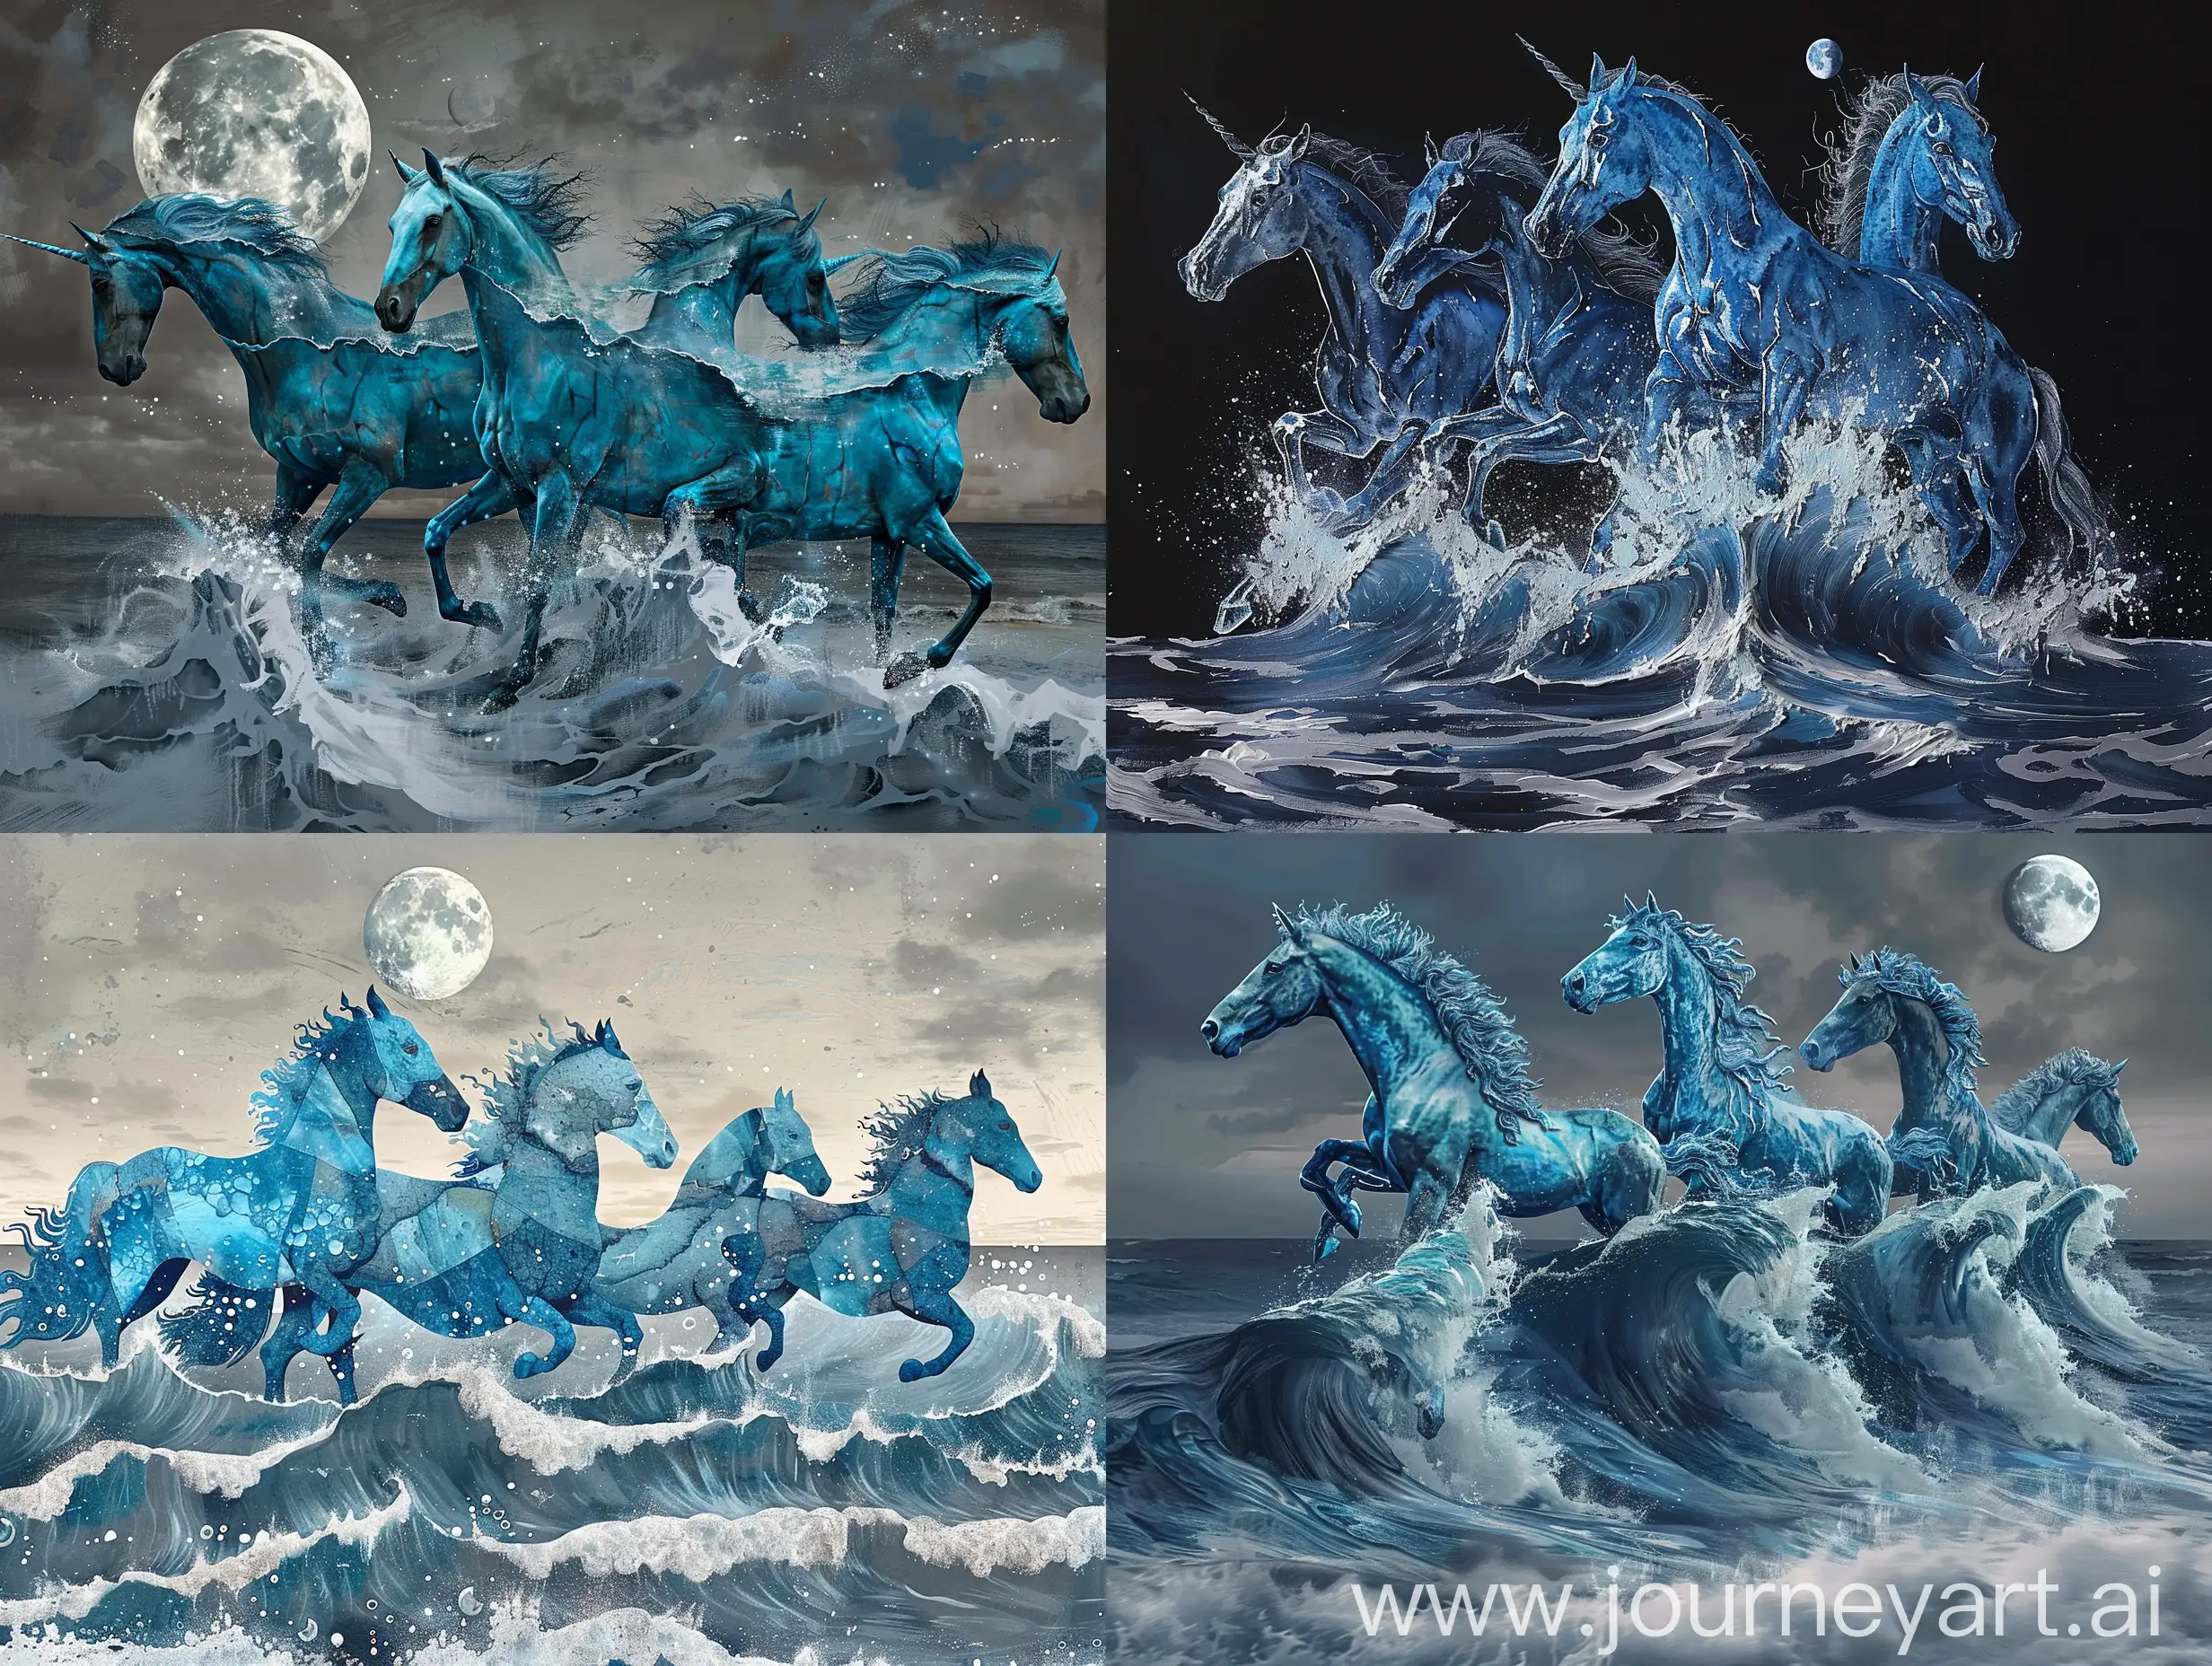 Blue horses in differents values shaped as ocean waves in a calm complementary color and grey shades ridin to the moon in a disrupted realism style